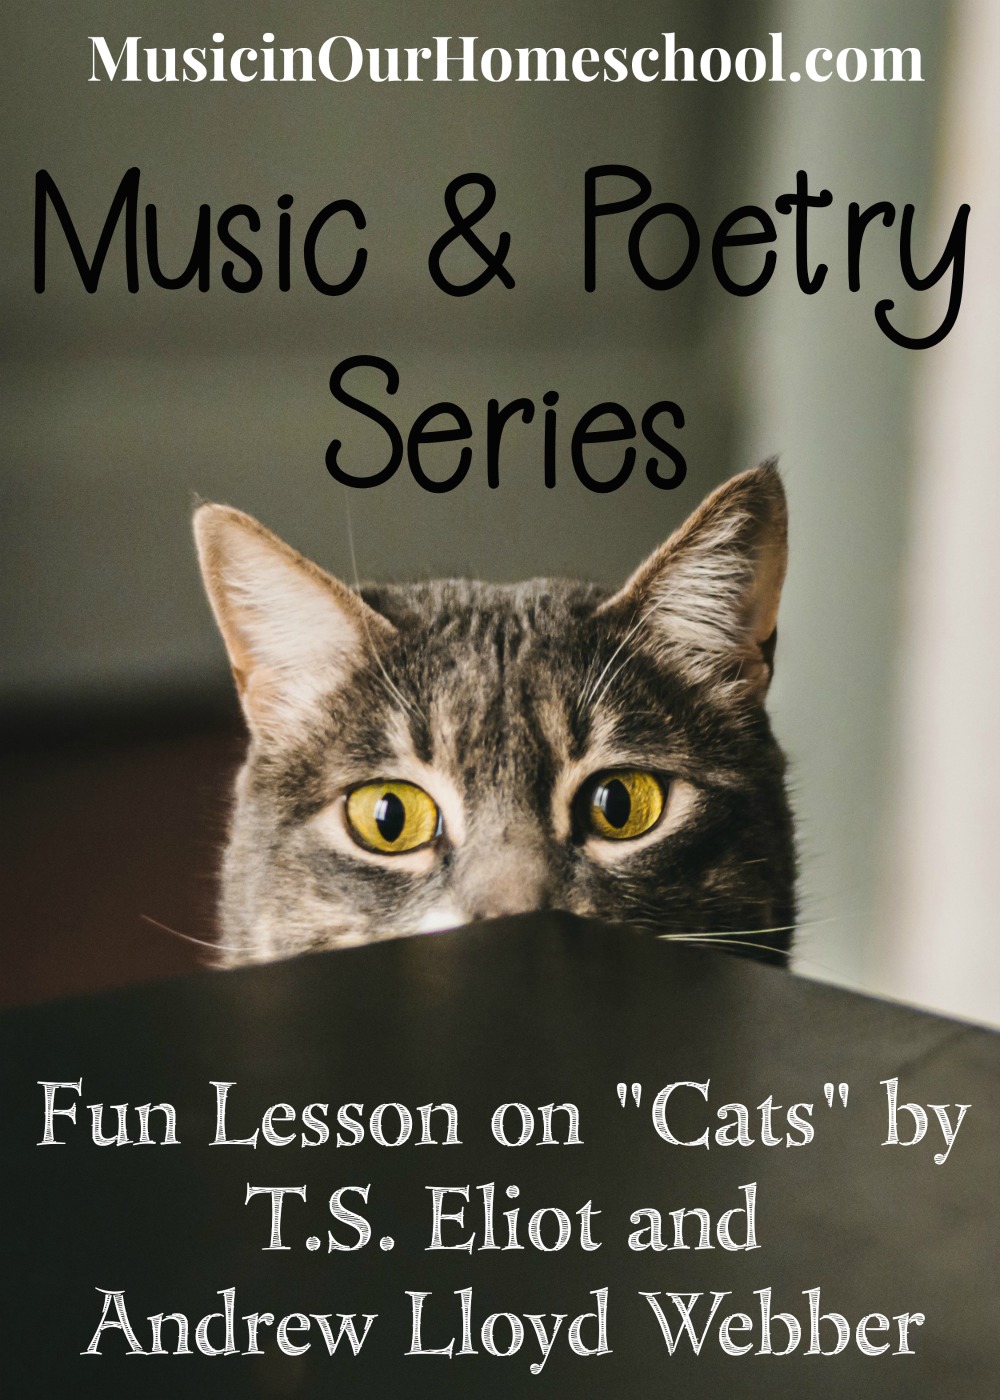 Music & Poetry: Fun Lesson on "Cats" by T.S. Eliot and Andrew Lloyd Webber. #catsthemusical #tseliot #andrewlloydwebber #poetry #music #musicinourhomeschool